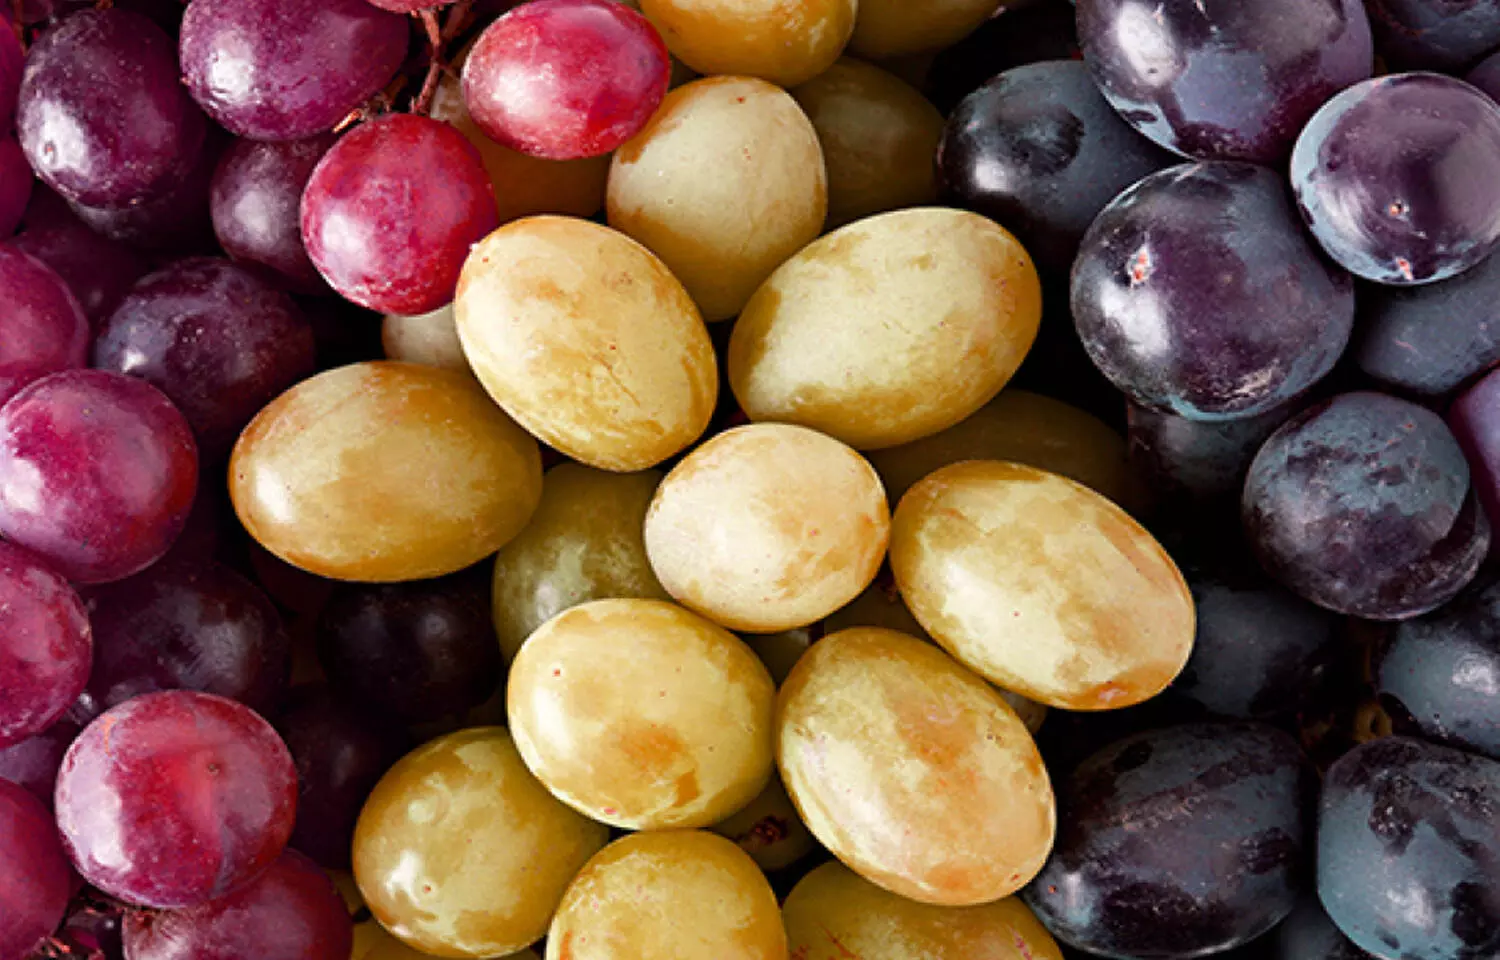 Grape consumption benefits gut microbiome and lowers cholesterol